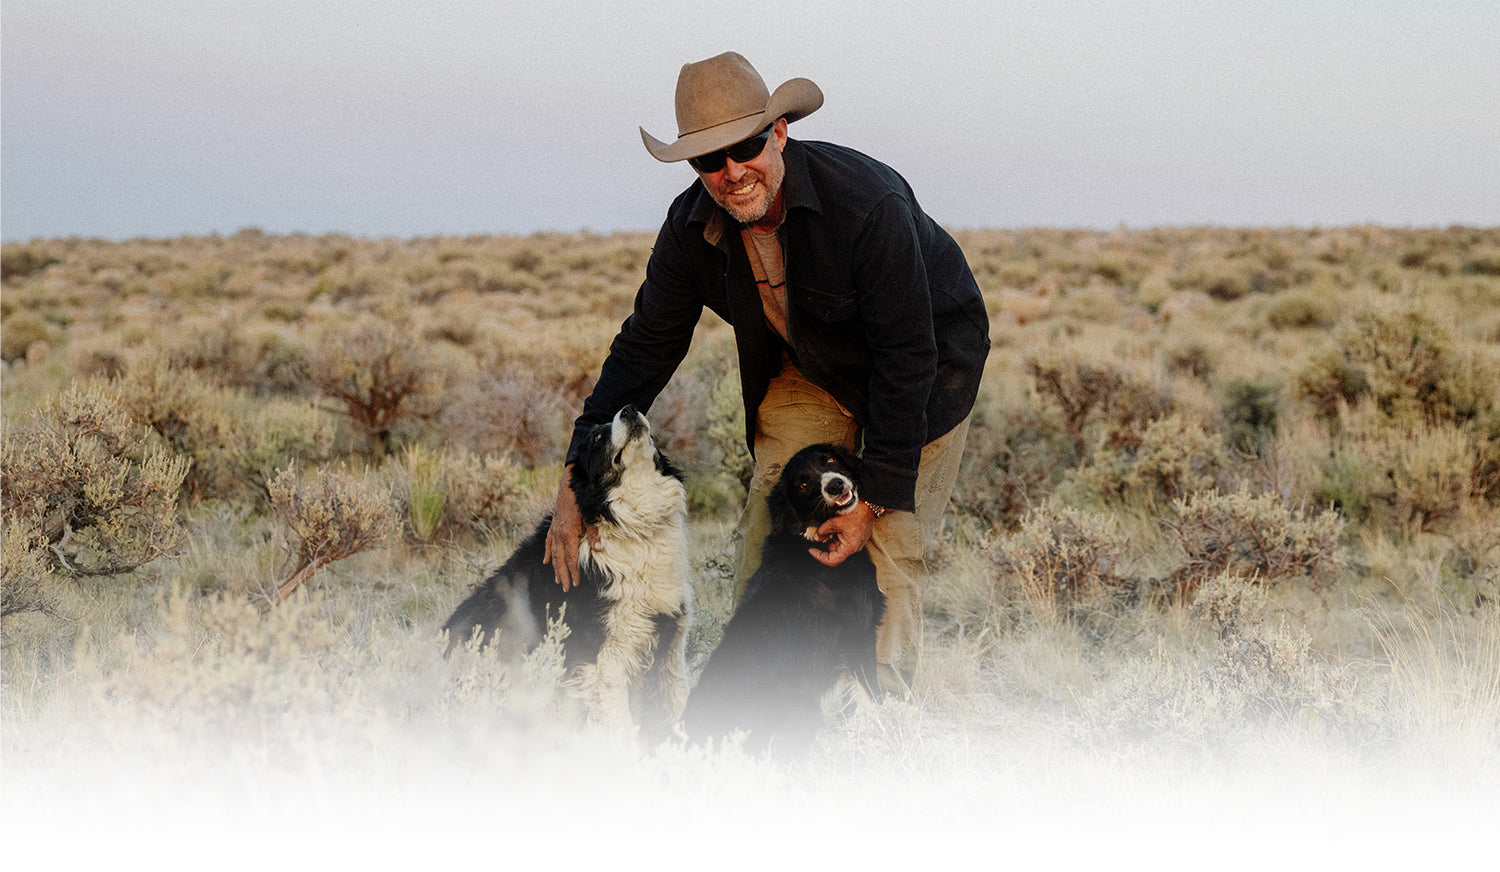 A letter from our founder and lead rancher, John Helle